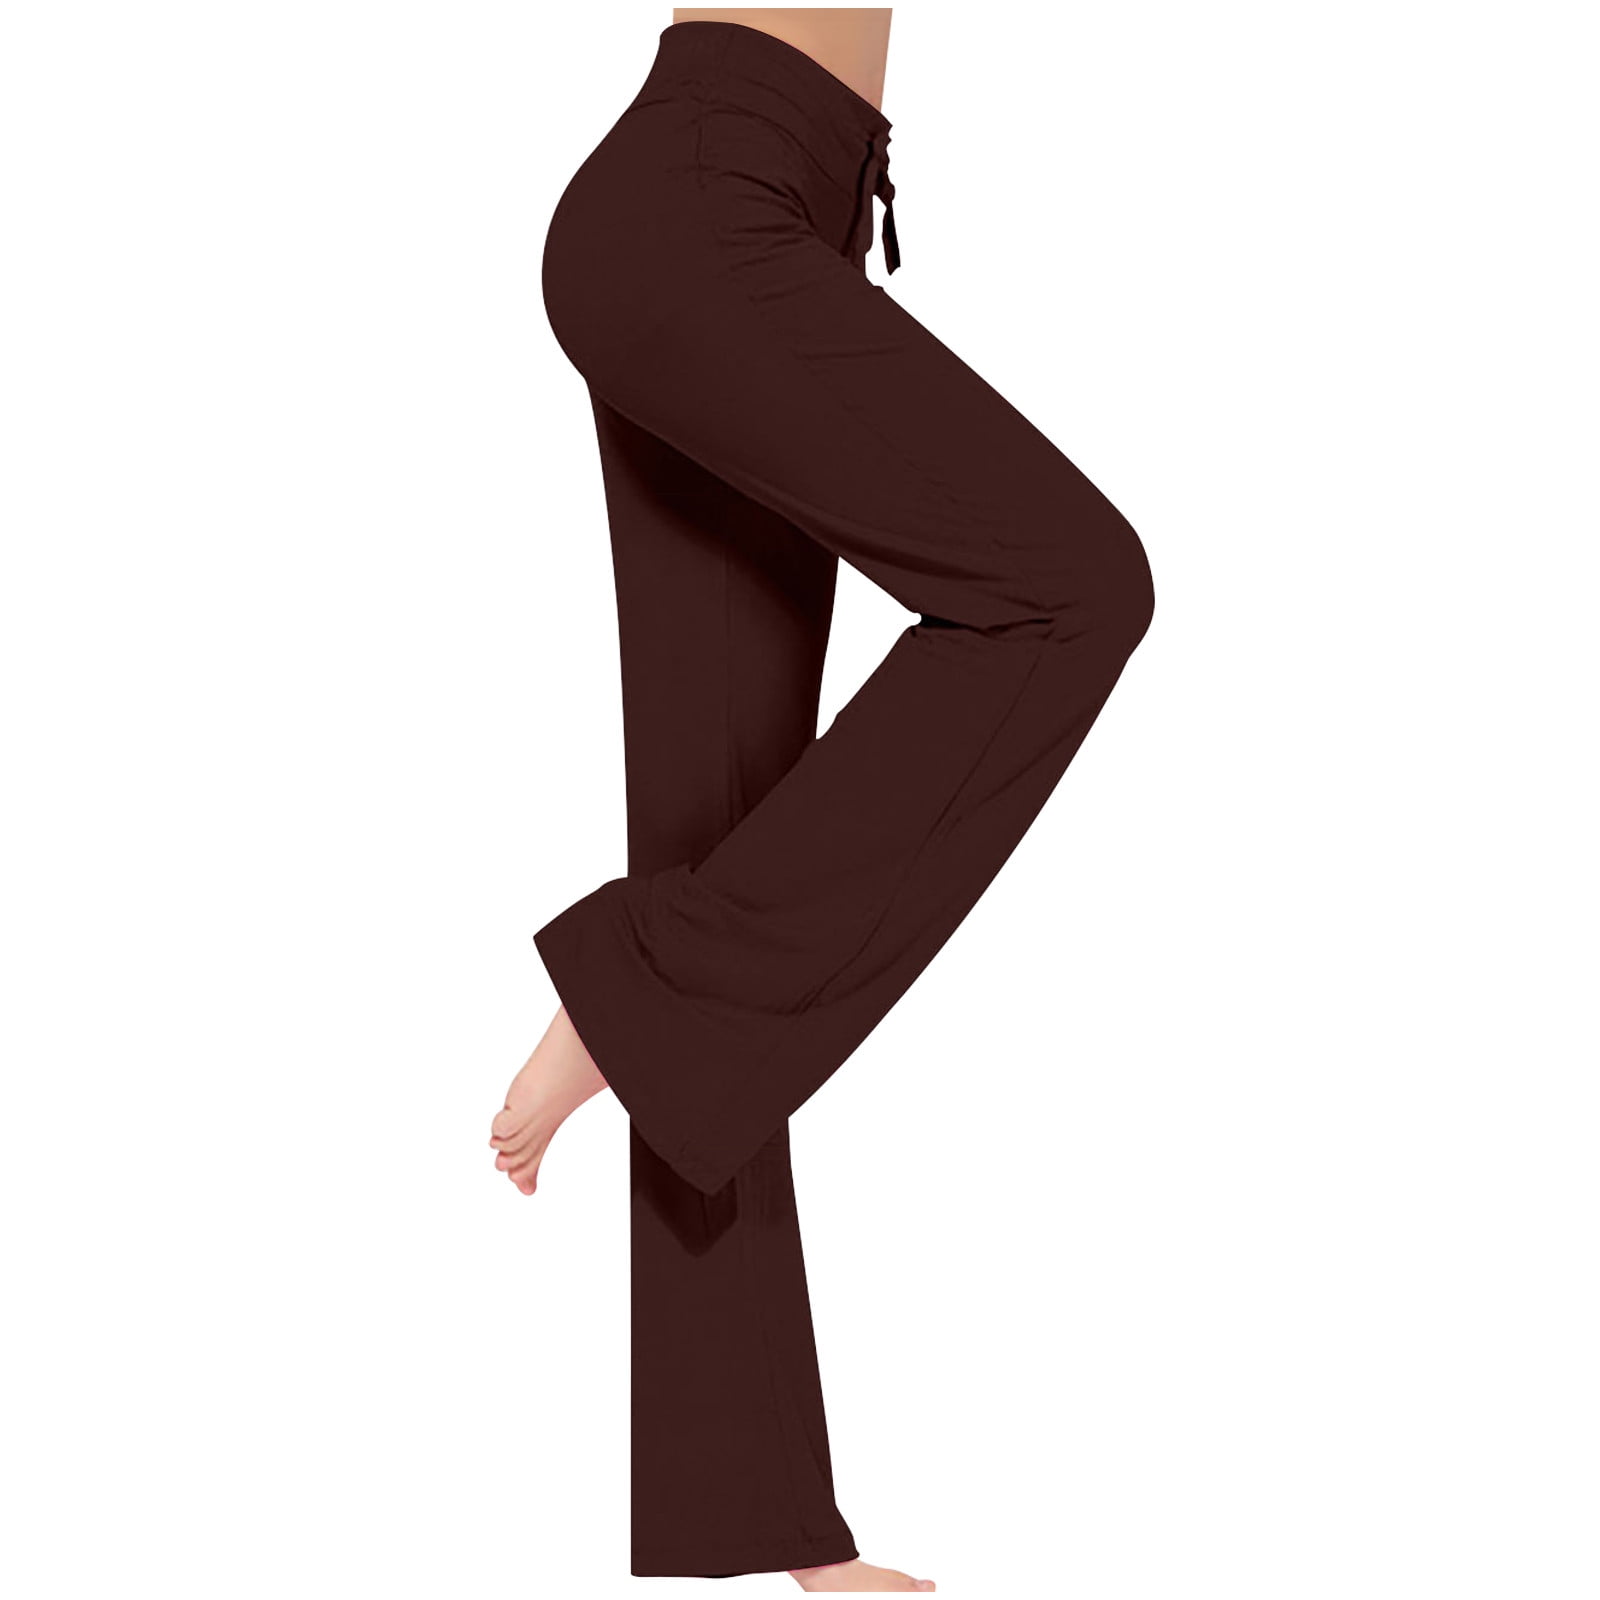 YUNAFFT Yoga Pants for Women Clearance Plus Size Women's Loose High Waist  Wide Leg Pants Workout Out Leggings Casual Trousers Yoga Gym Pants 